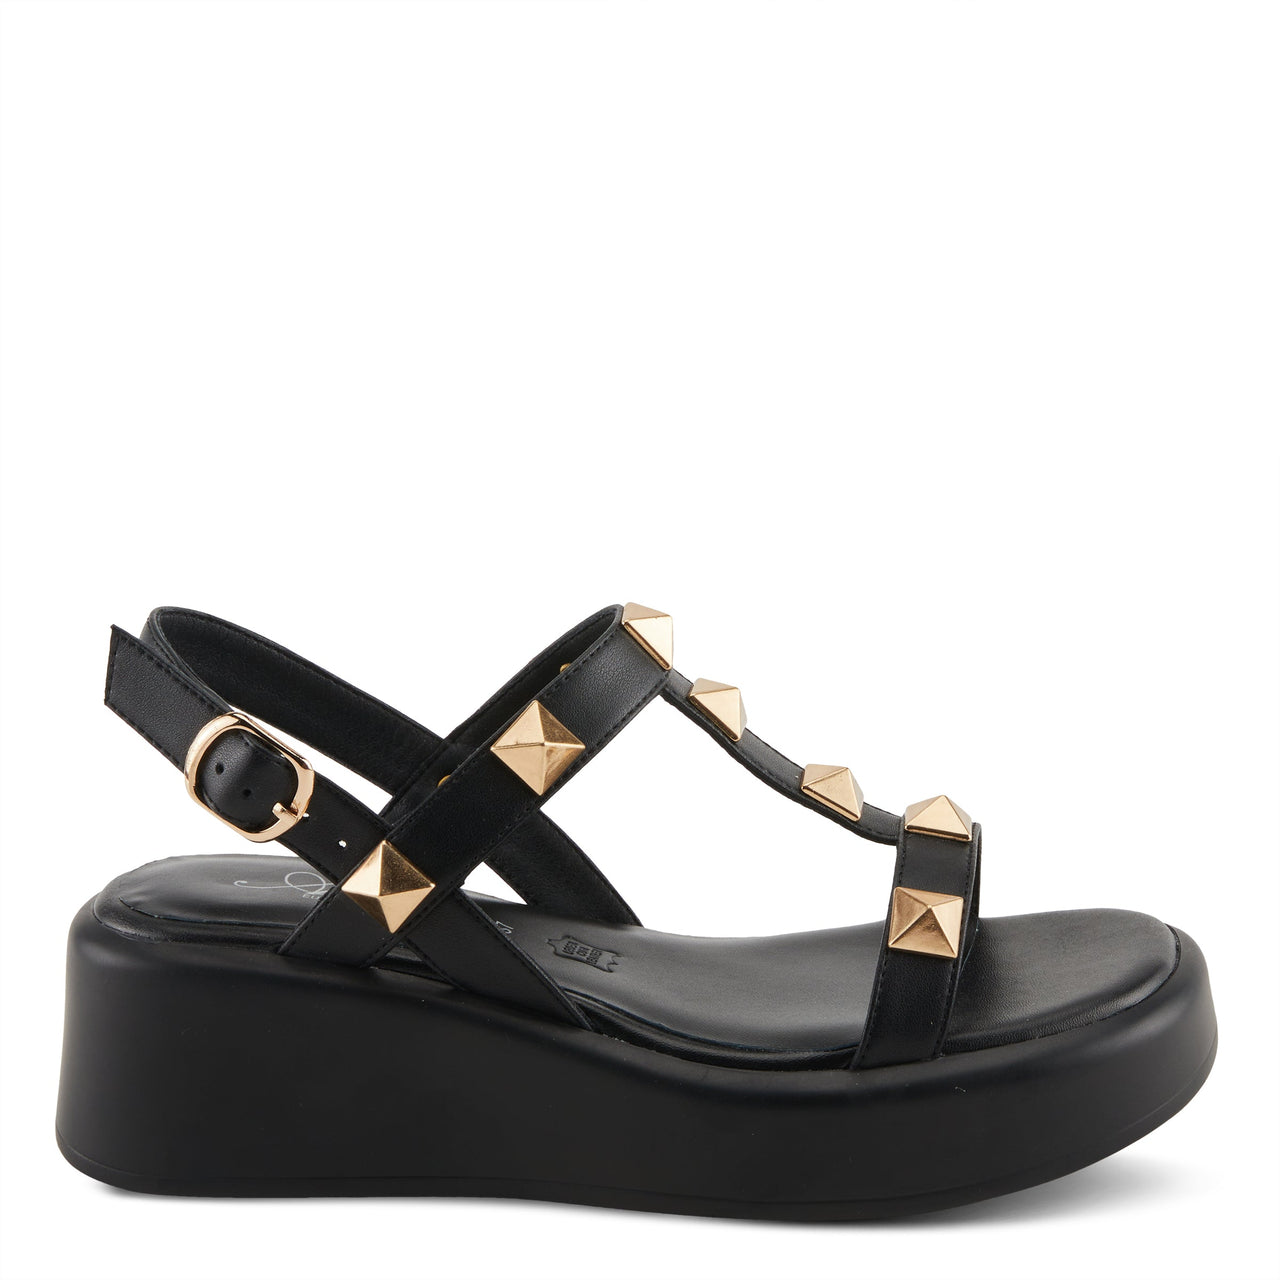 Spring Step Shoes Azura Boogierock Sandals - Women's black leather wedge sandals with metallic embellishments and adjustable ankle strap